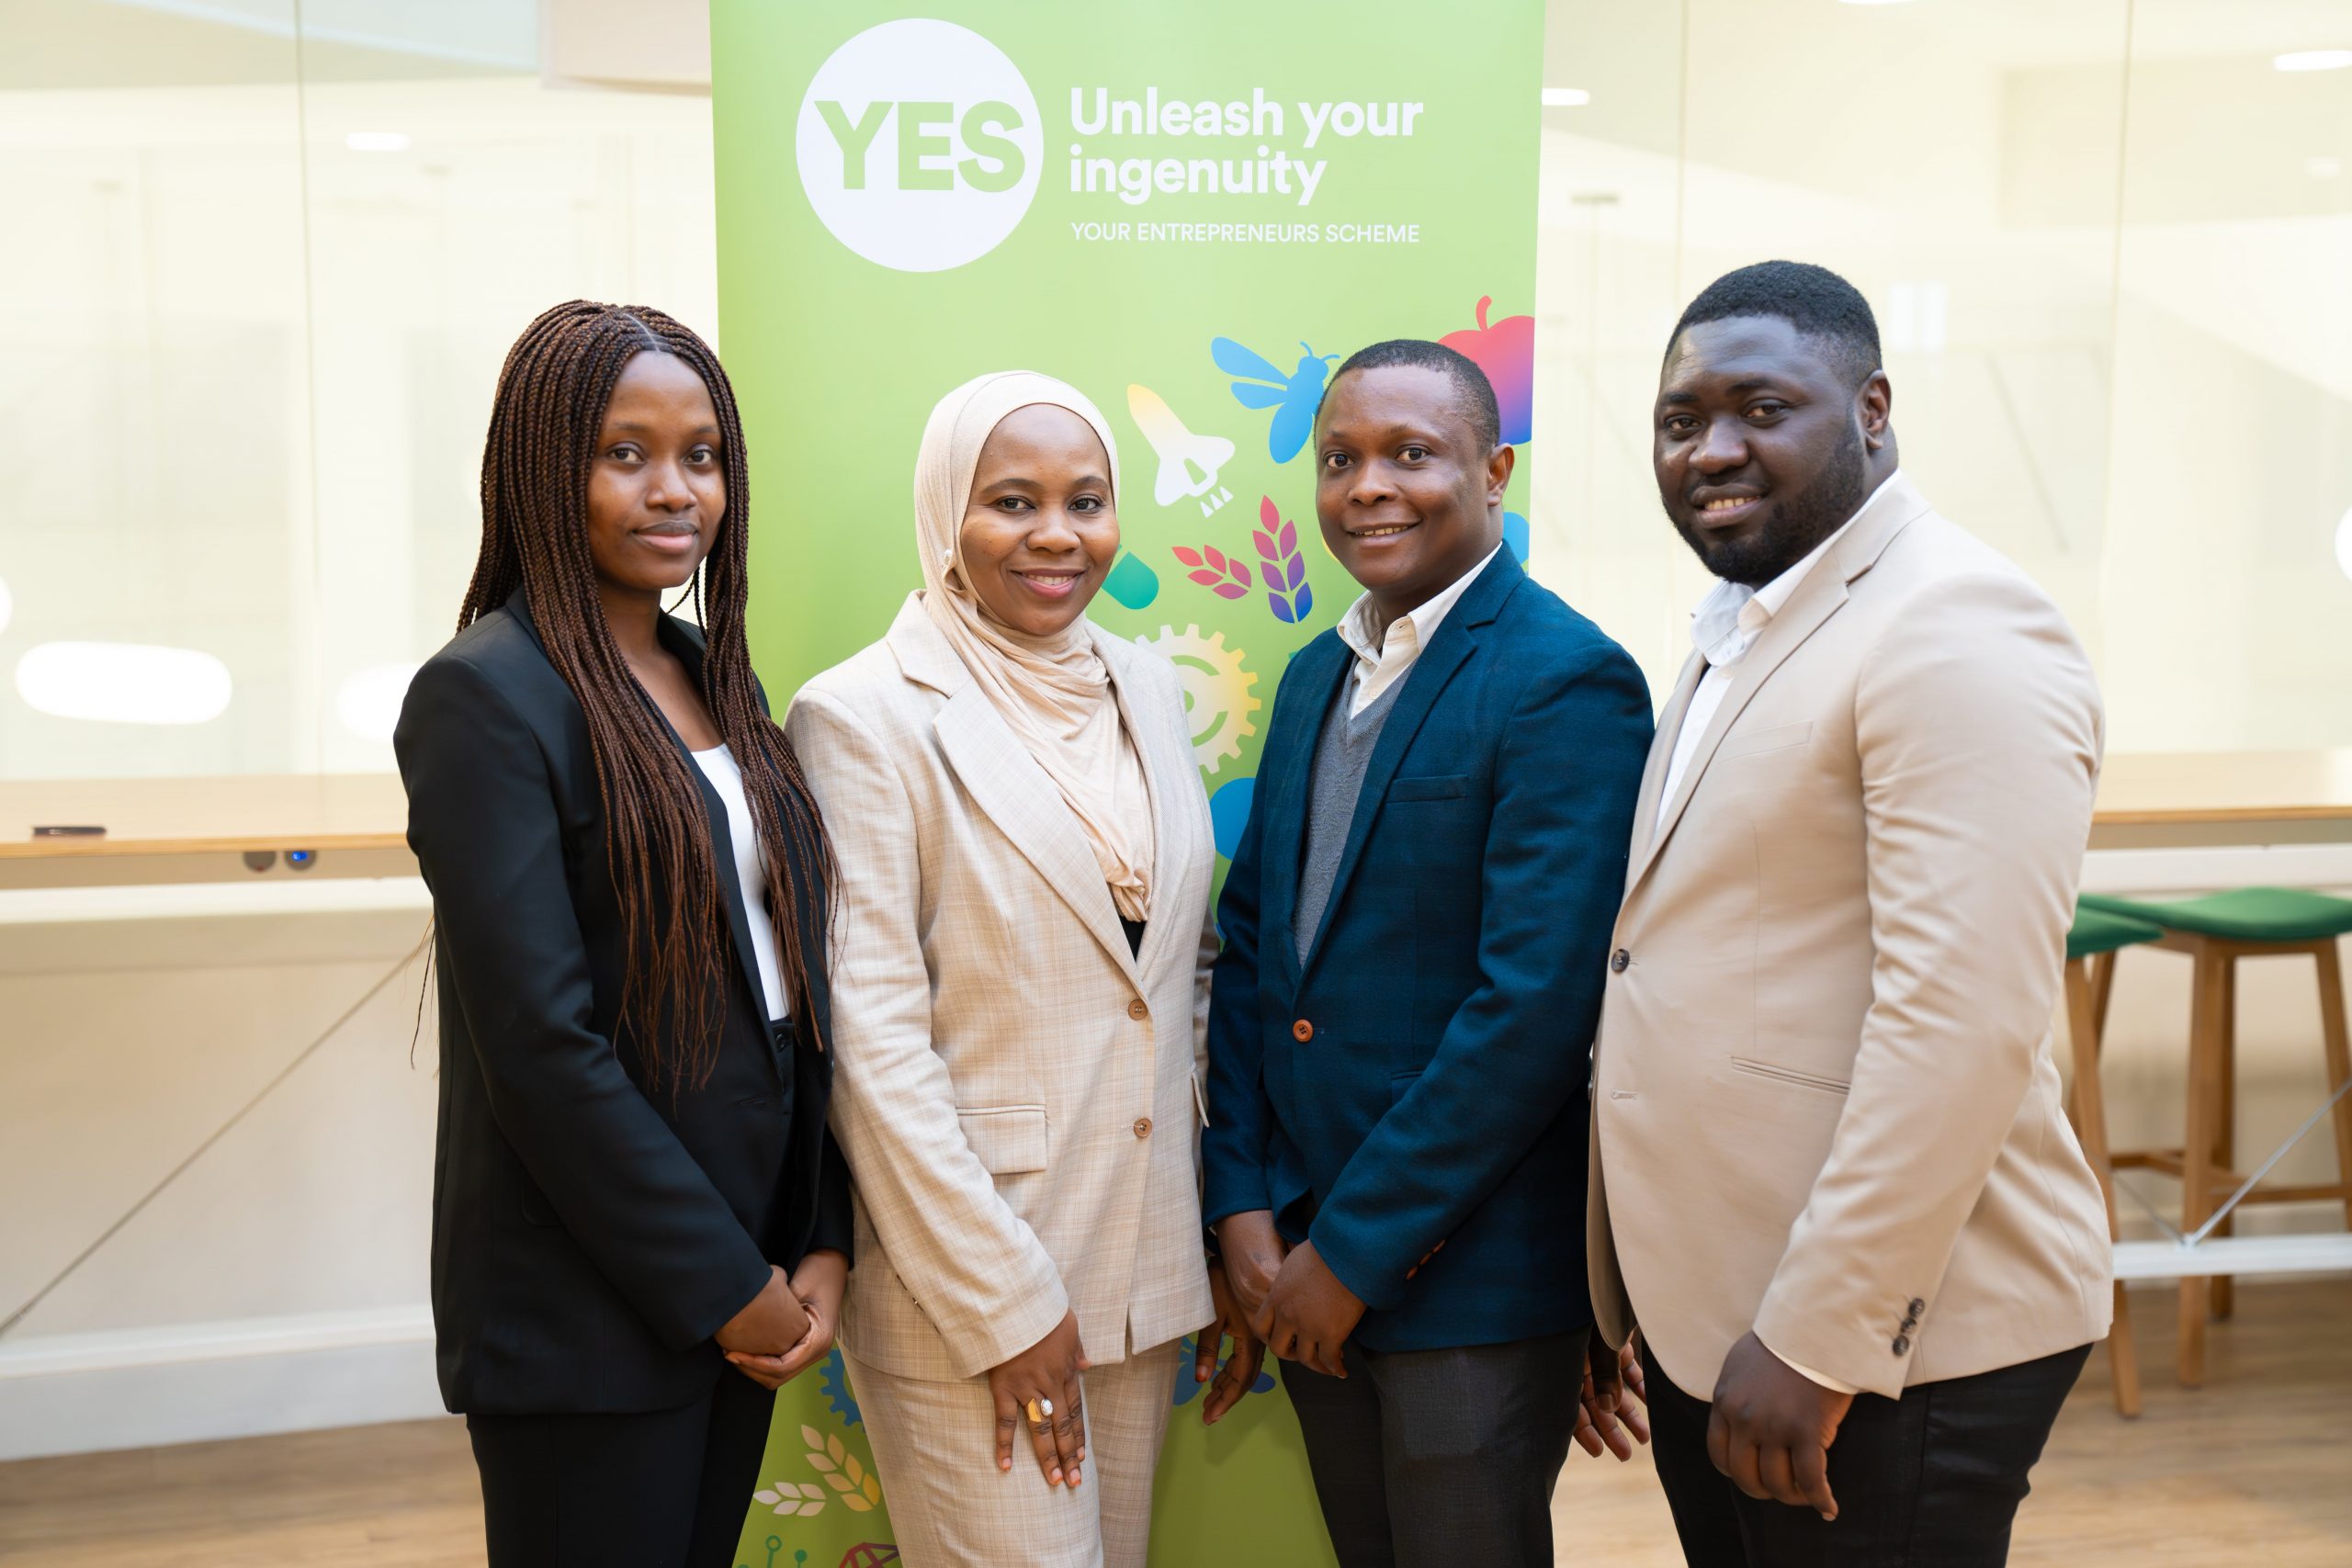 The four team members pose for a photo in front of the YES banner